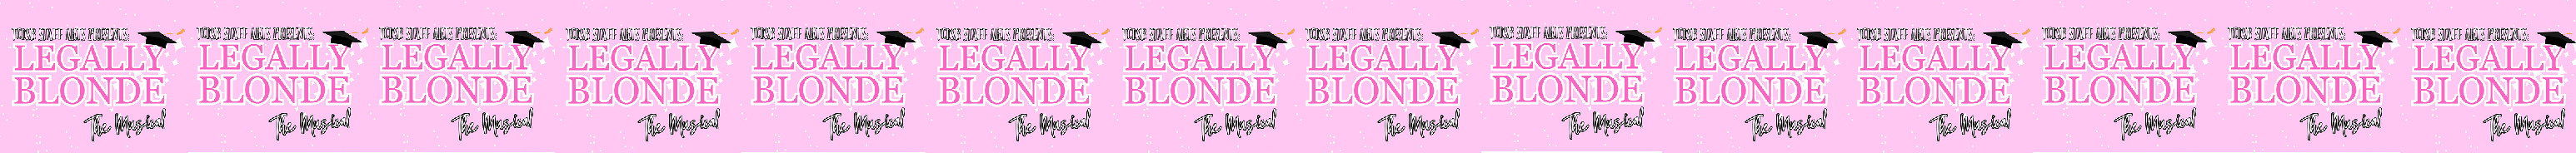 Banner that says Legally Blonde